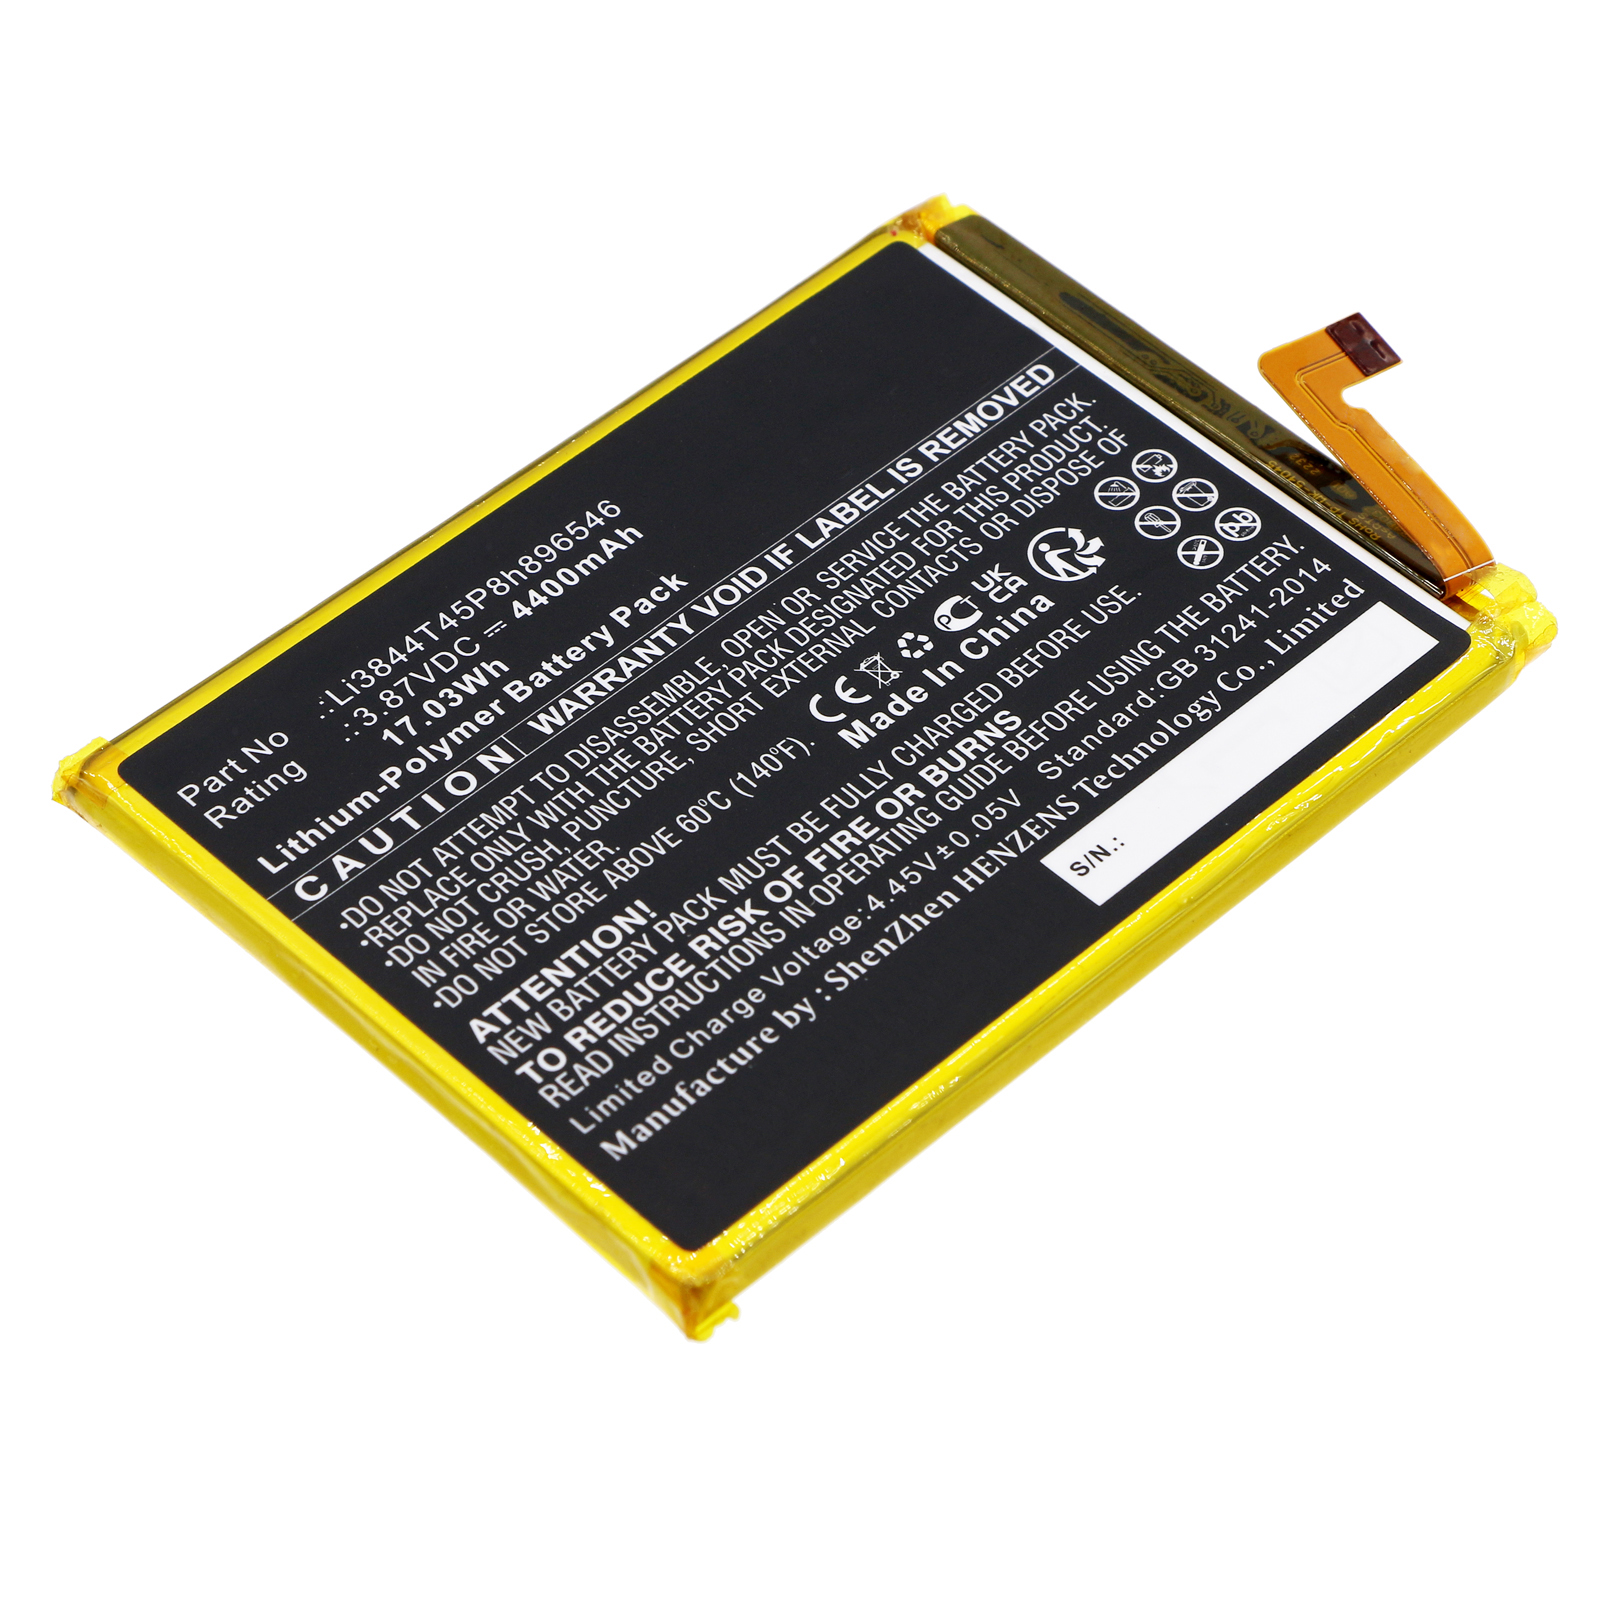 Synergy Digital Cell Phone Battery, Compatible with ZTE Li3844T45P8h896546 Cell Phone Battery (Li-Pol, 3.87V, 4400mAh)